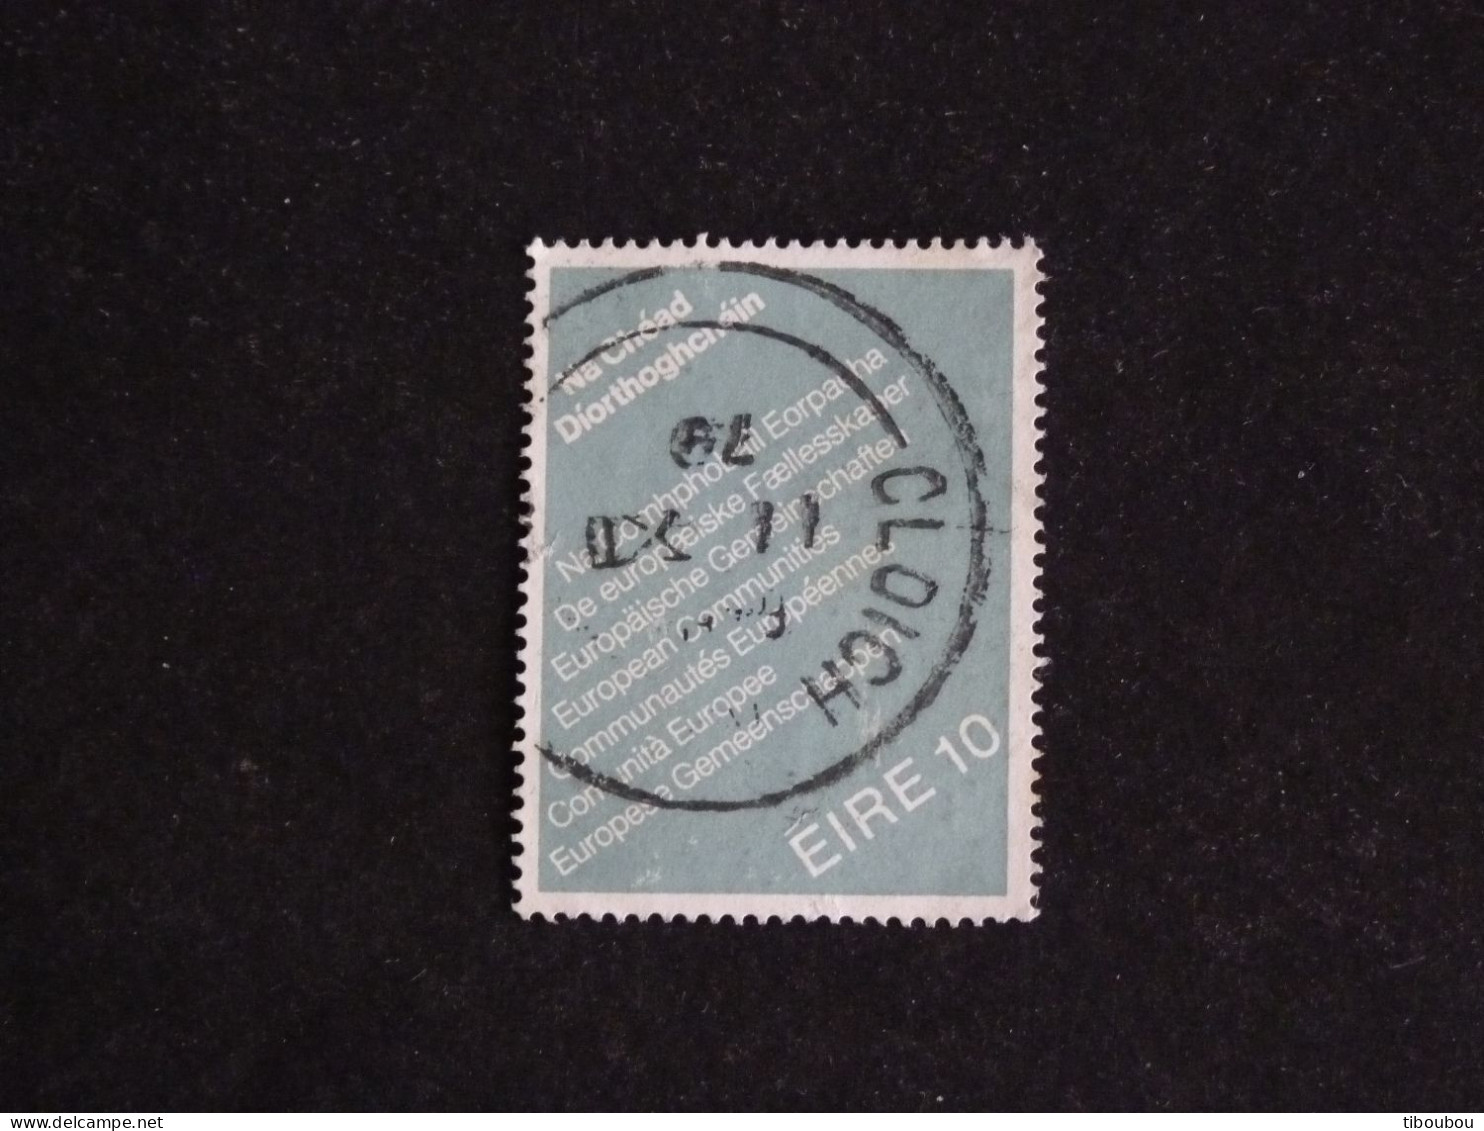 IRLANDE IRELAND EIRE YT 396 OBLITERE - ELECTIONS PARLEMENT EUROPEEN - Used Stamps